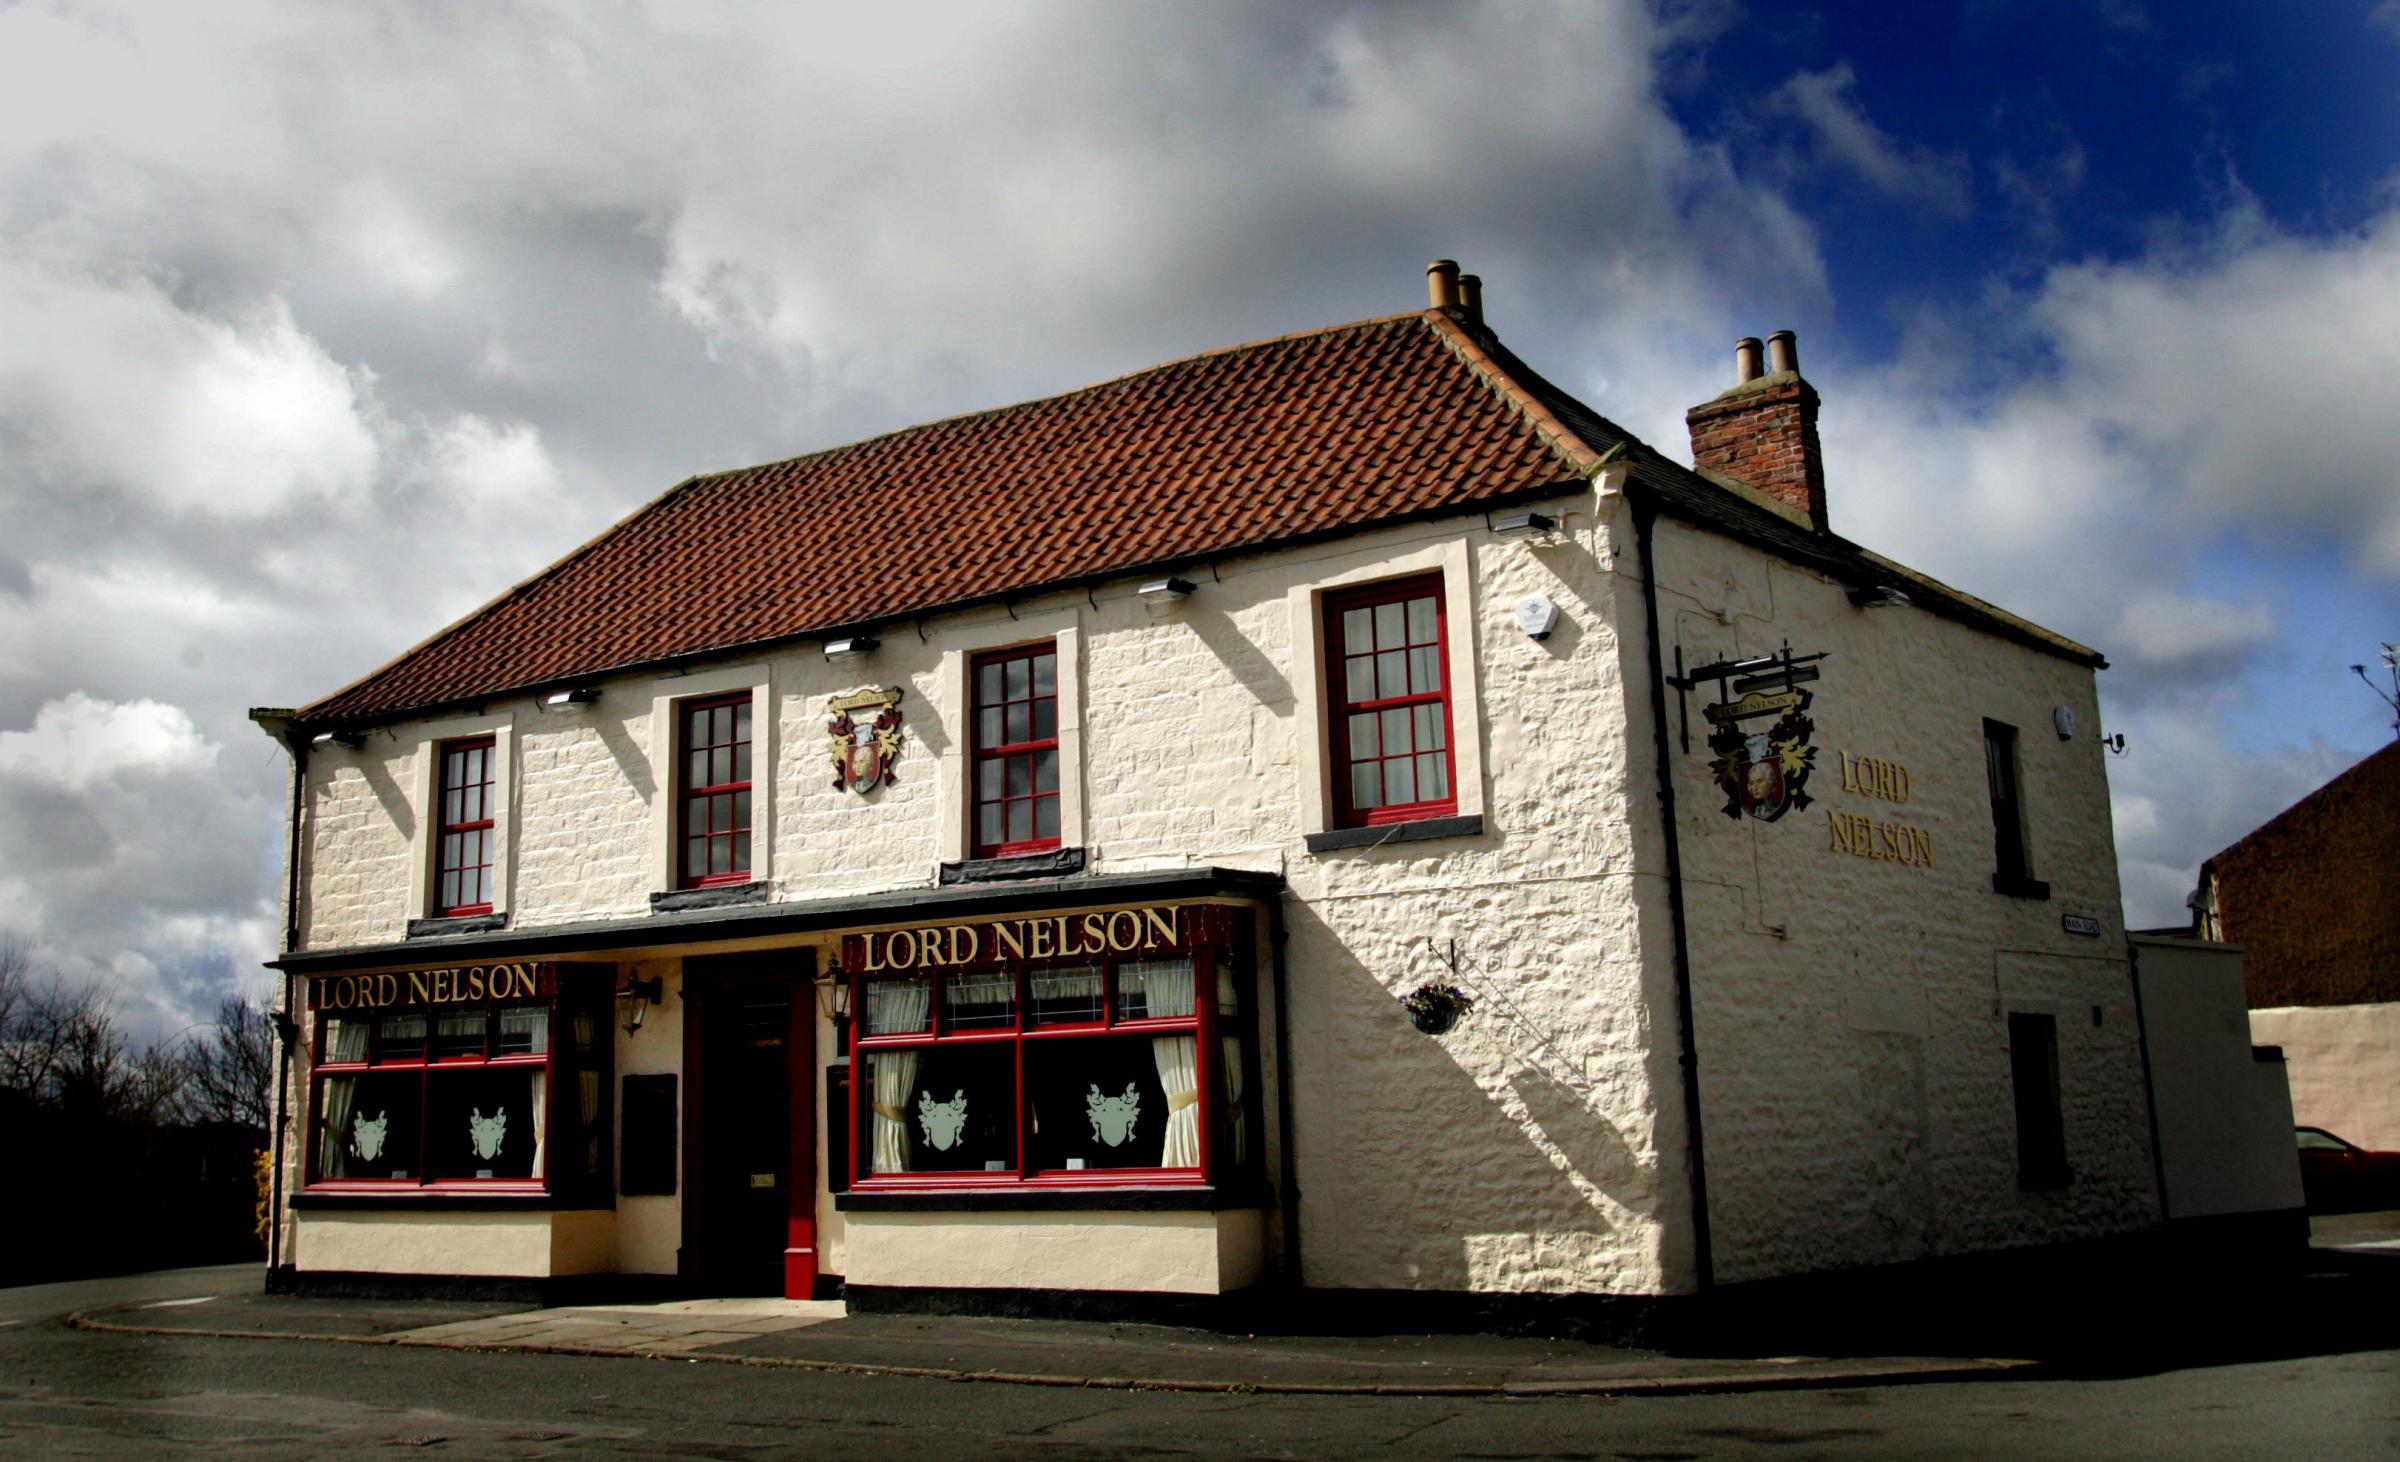 The Lord Nelson in Gainford in its serving days. It was once known as the Yorkshire Stingo. What was a Yorkshire stingo?